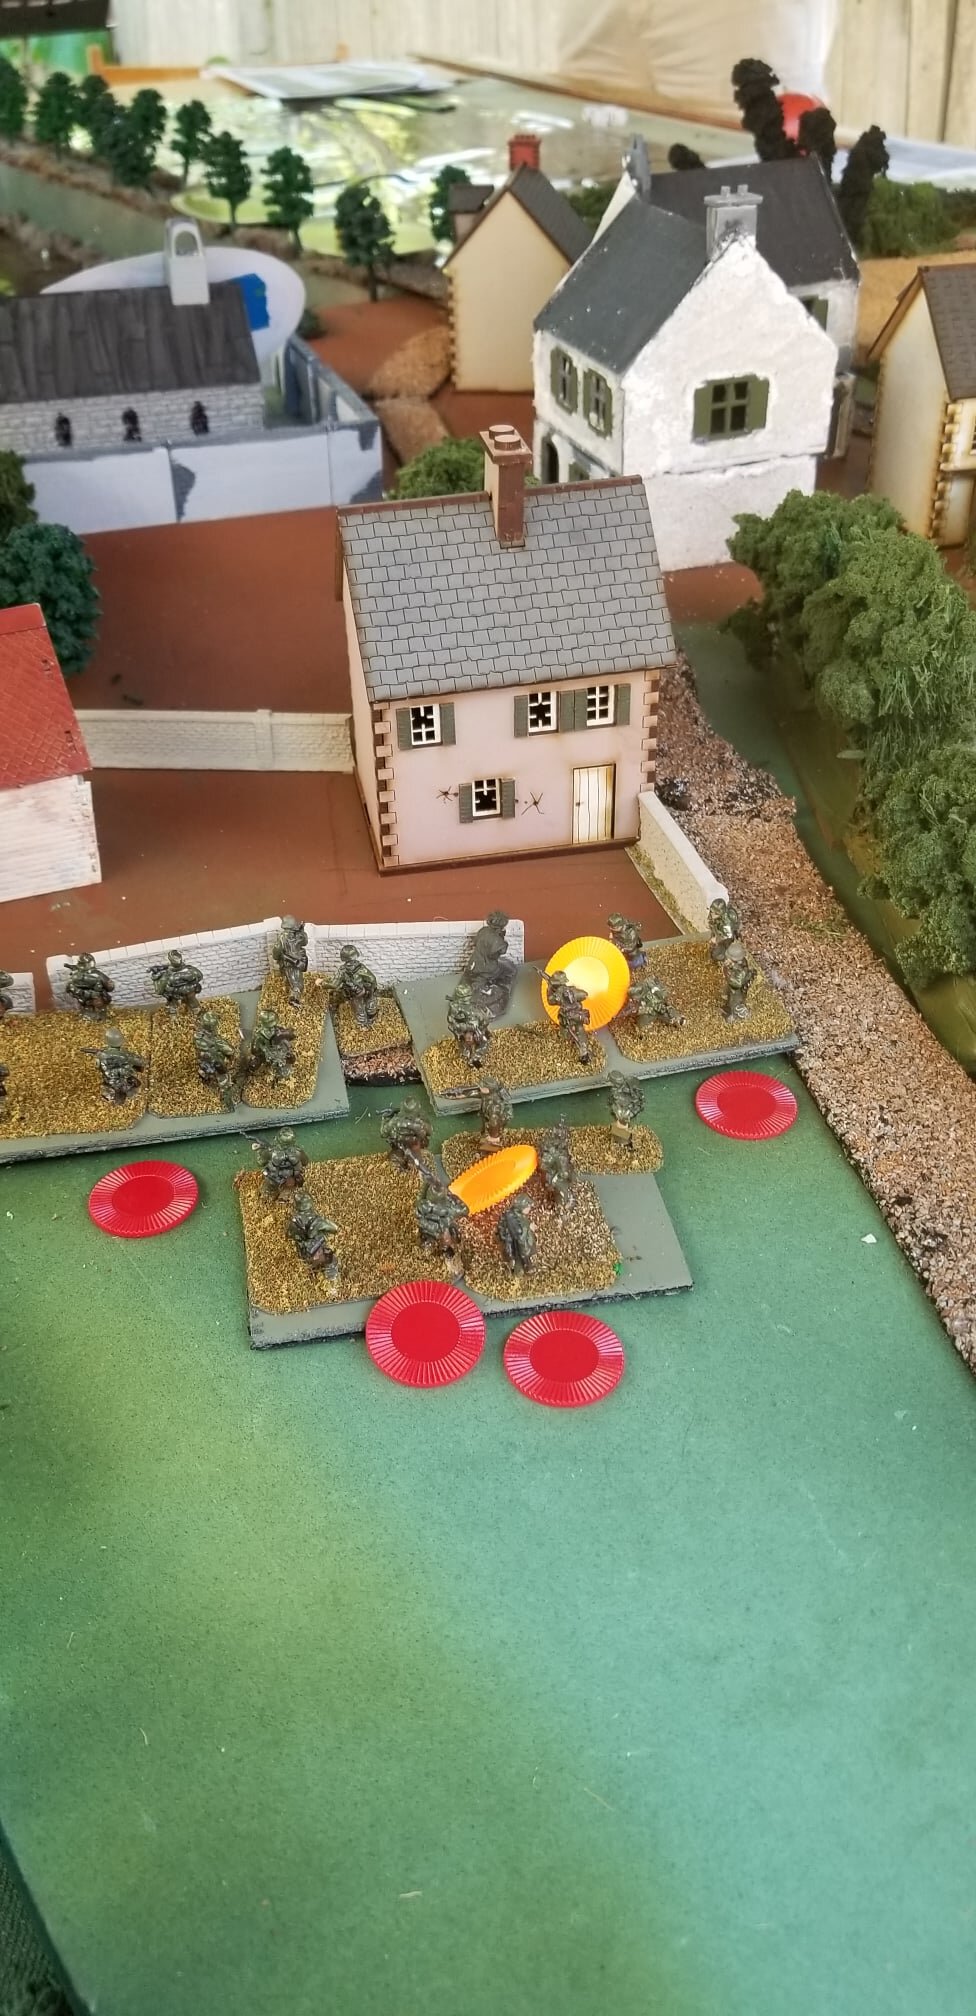 German infantry suffers shock from a US MG firing from a 2nd story window